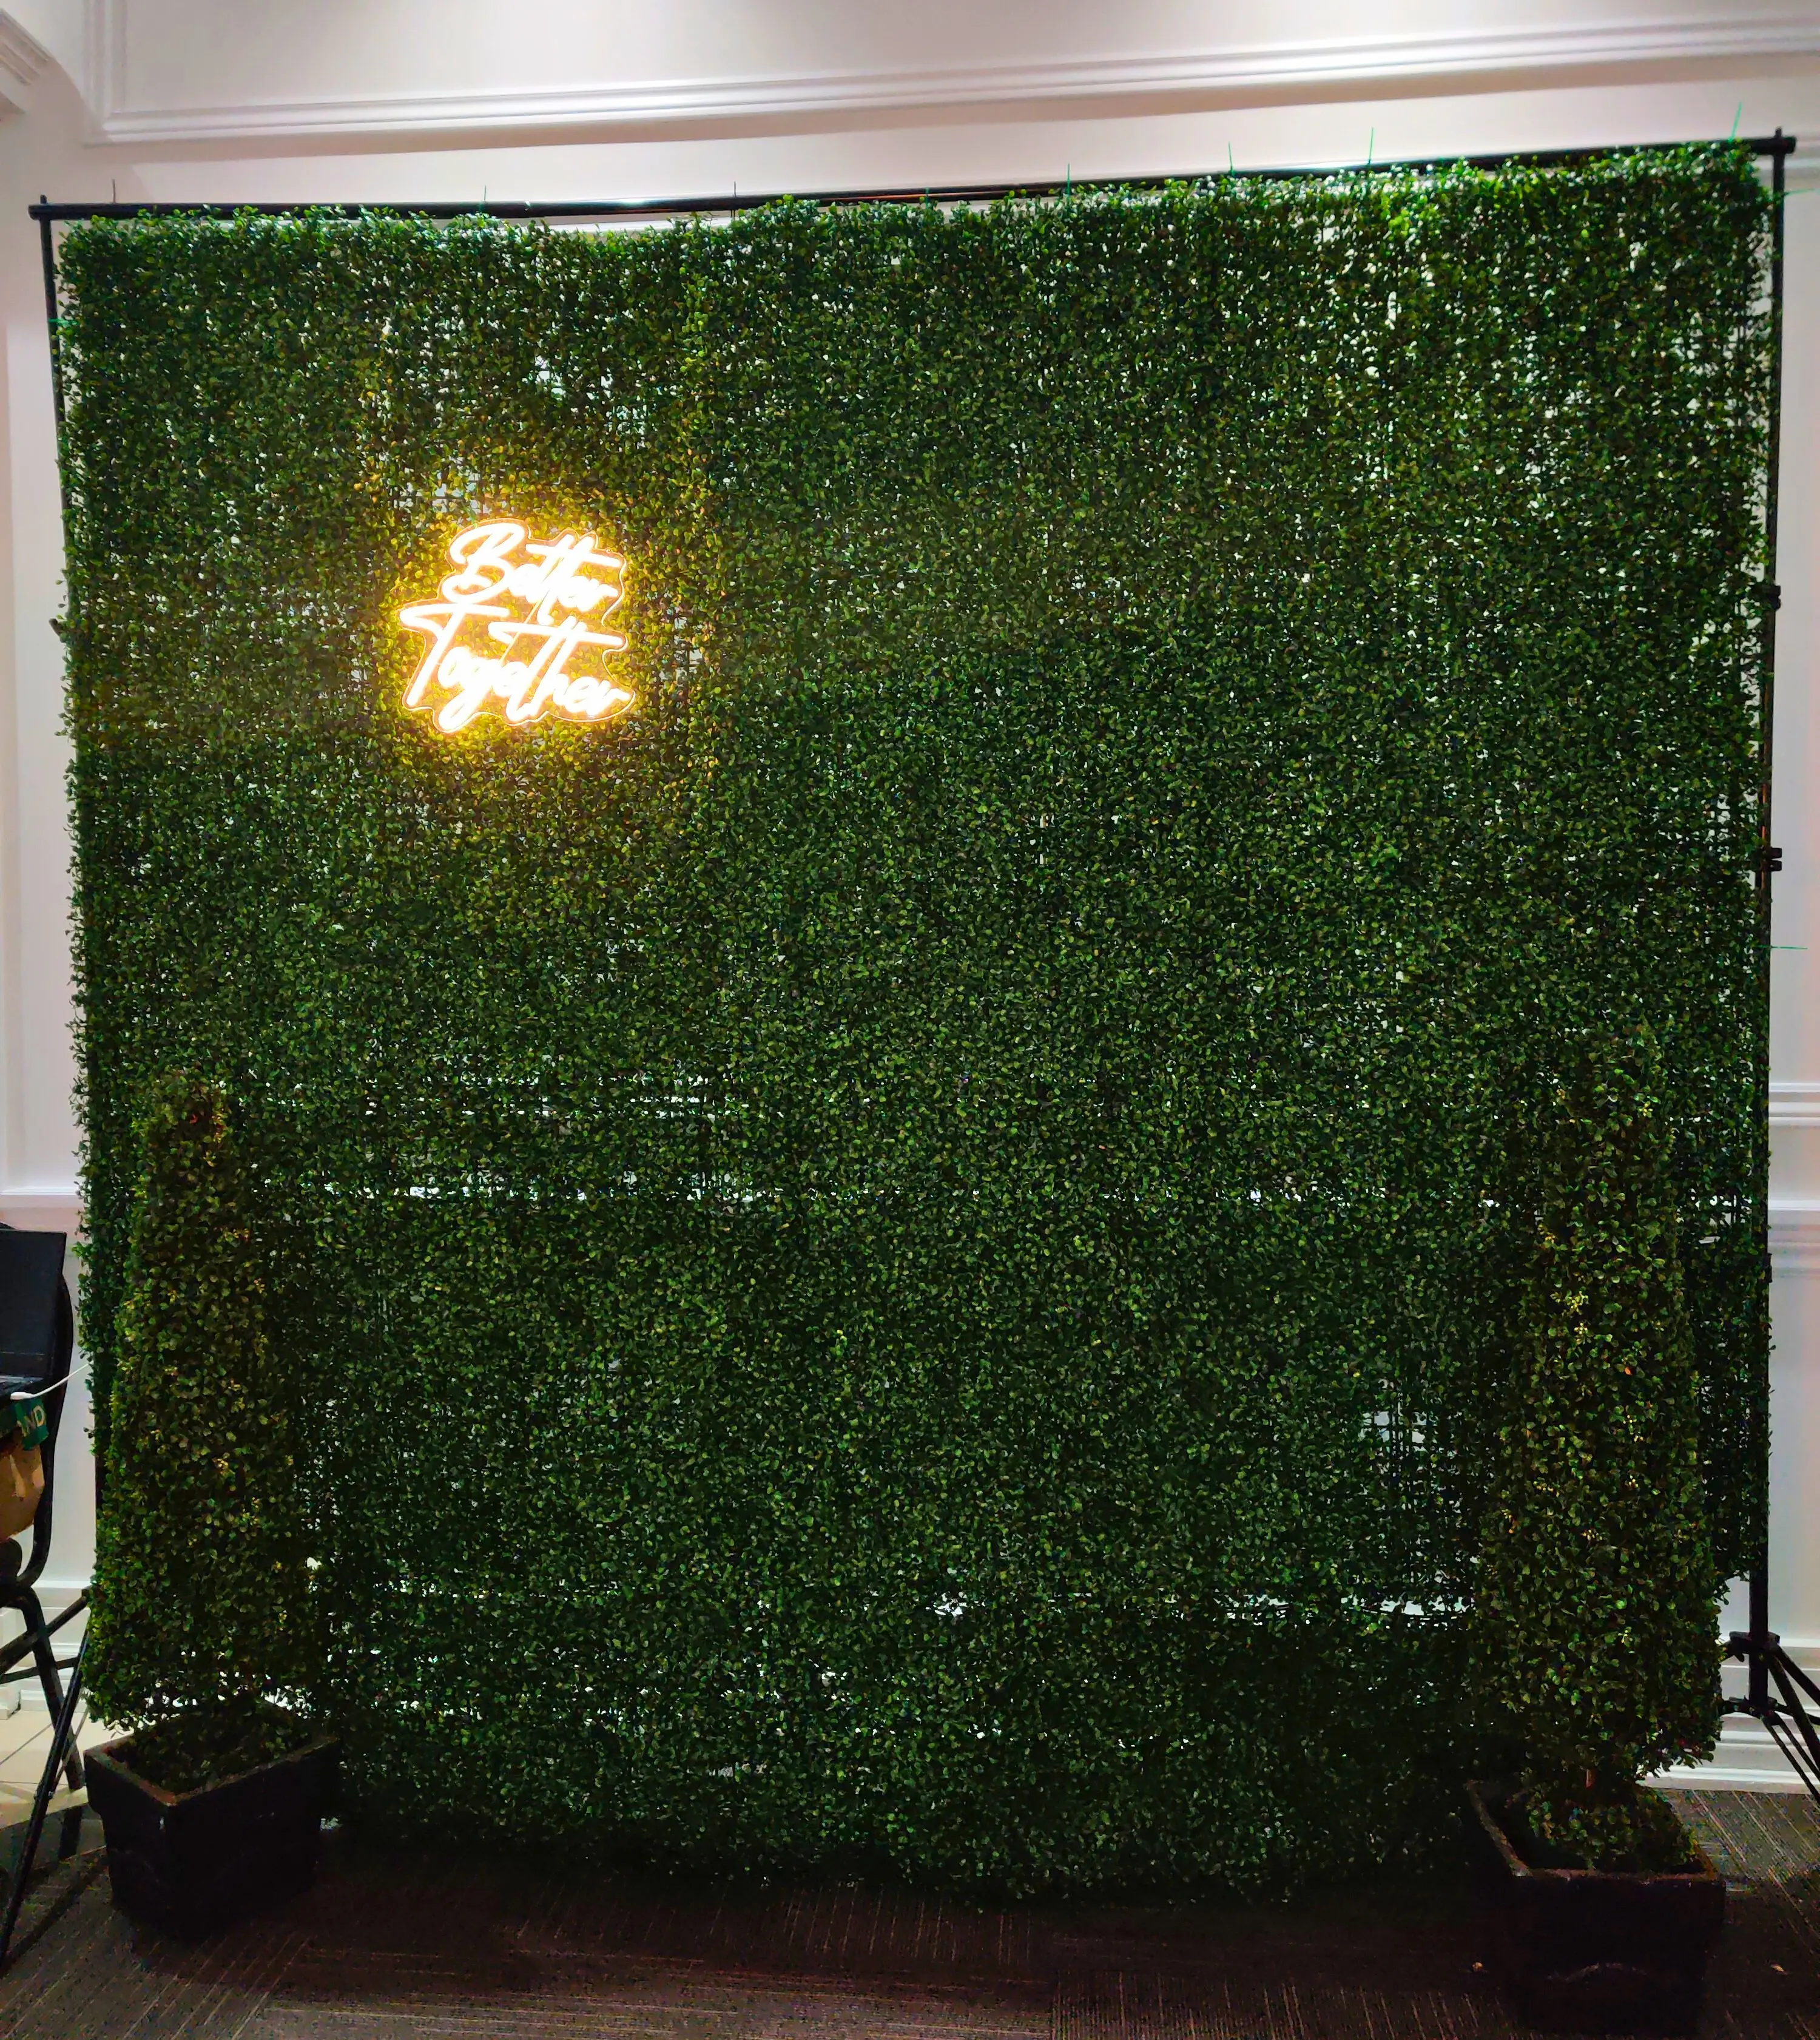 Lush greenery wall with a neon sign saying 'Better Together', set up as a photobooth backdrop for weddings or special events, adding a touch of nature-inspired elegance provided by Rent a PhotoBooth photobooth rentals.